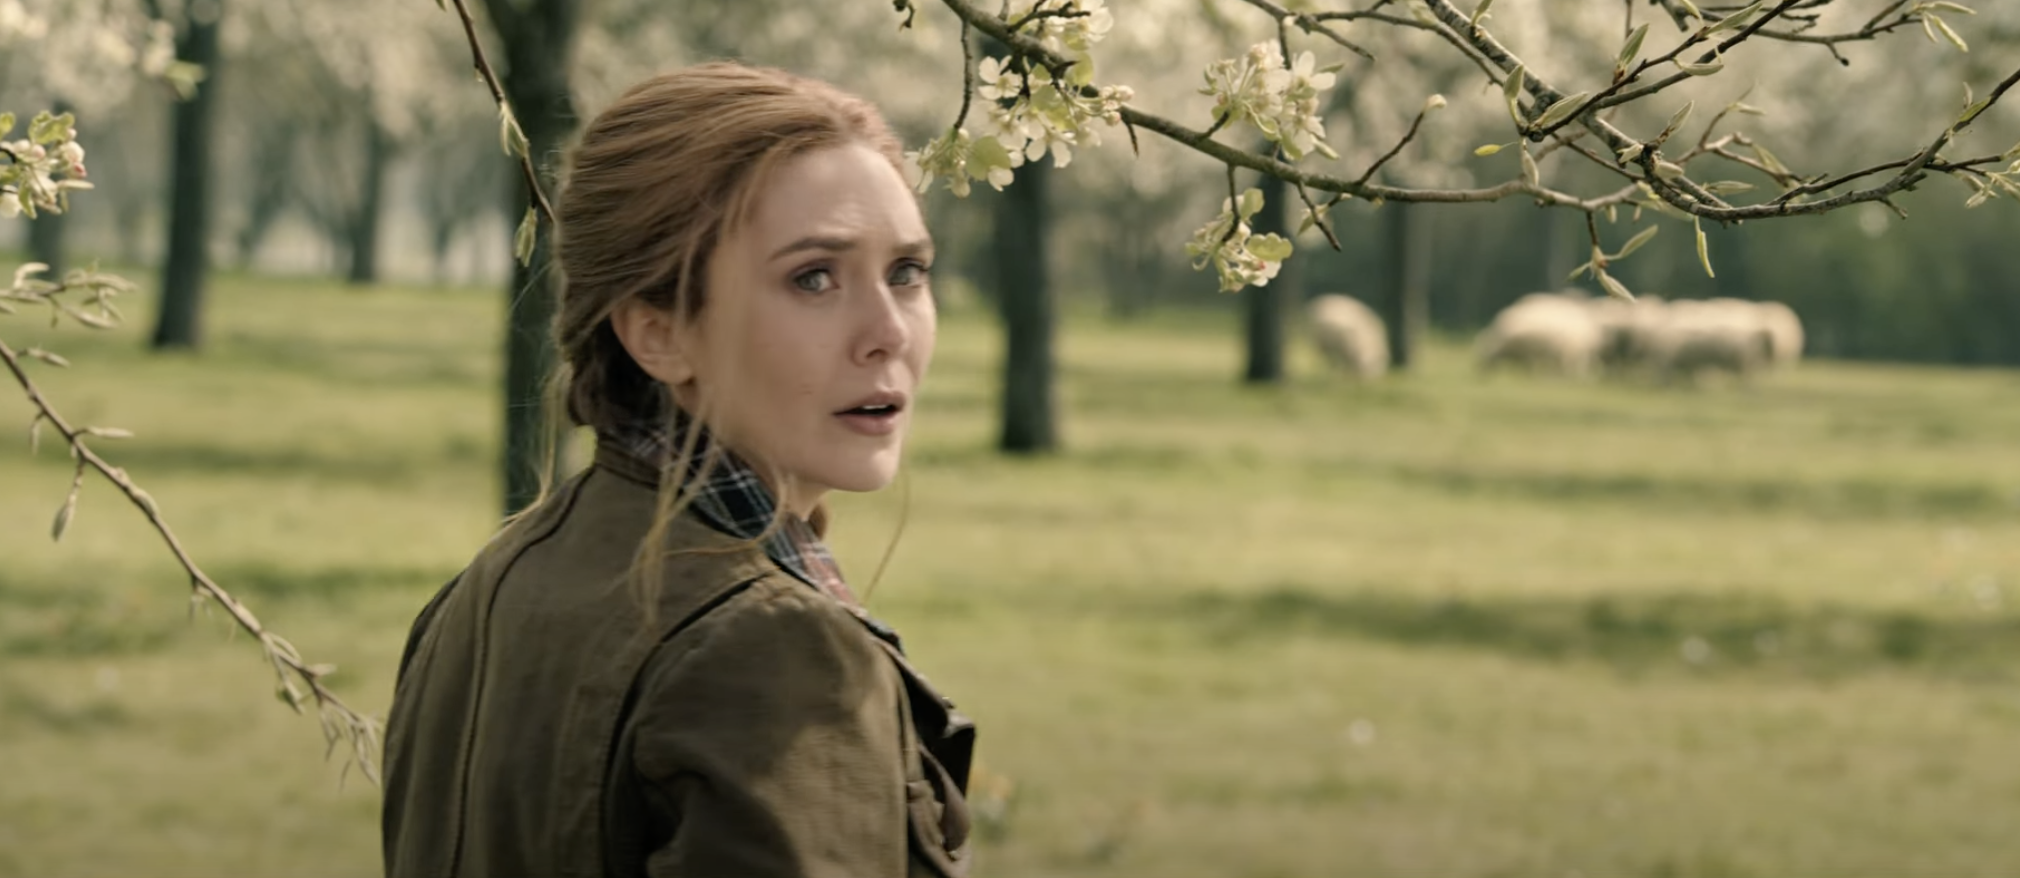 Wanda standing in a field next to a flowering tree